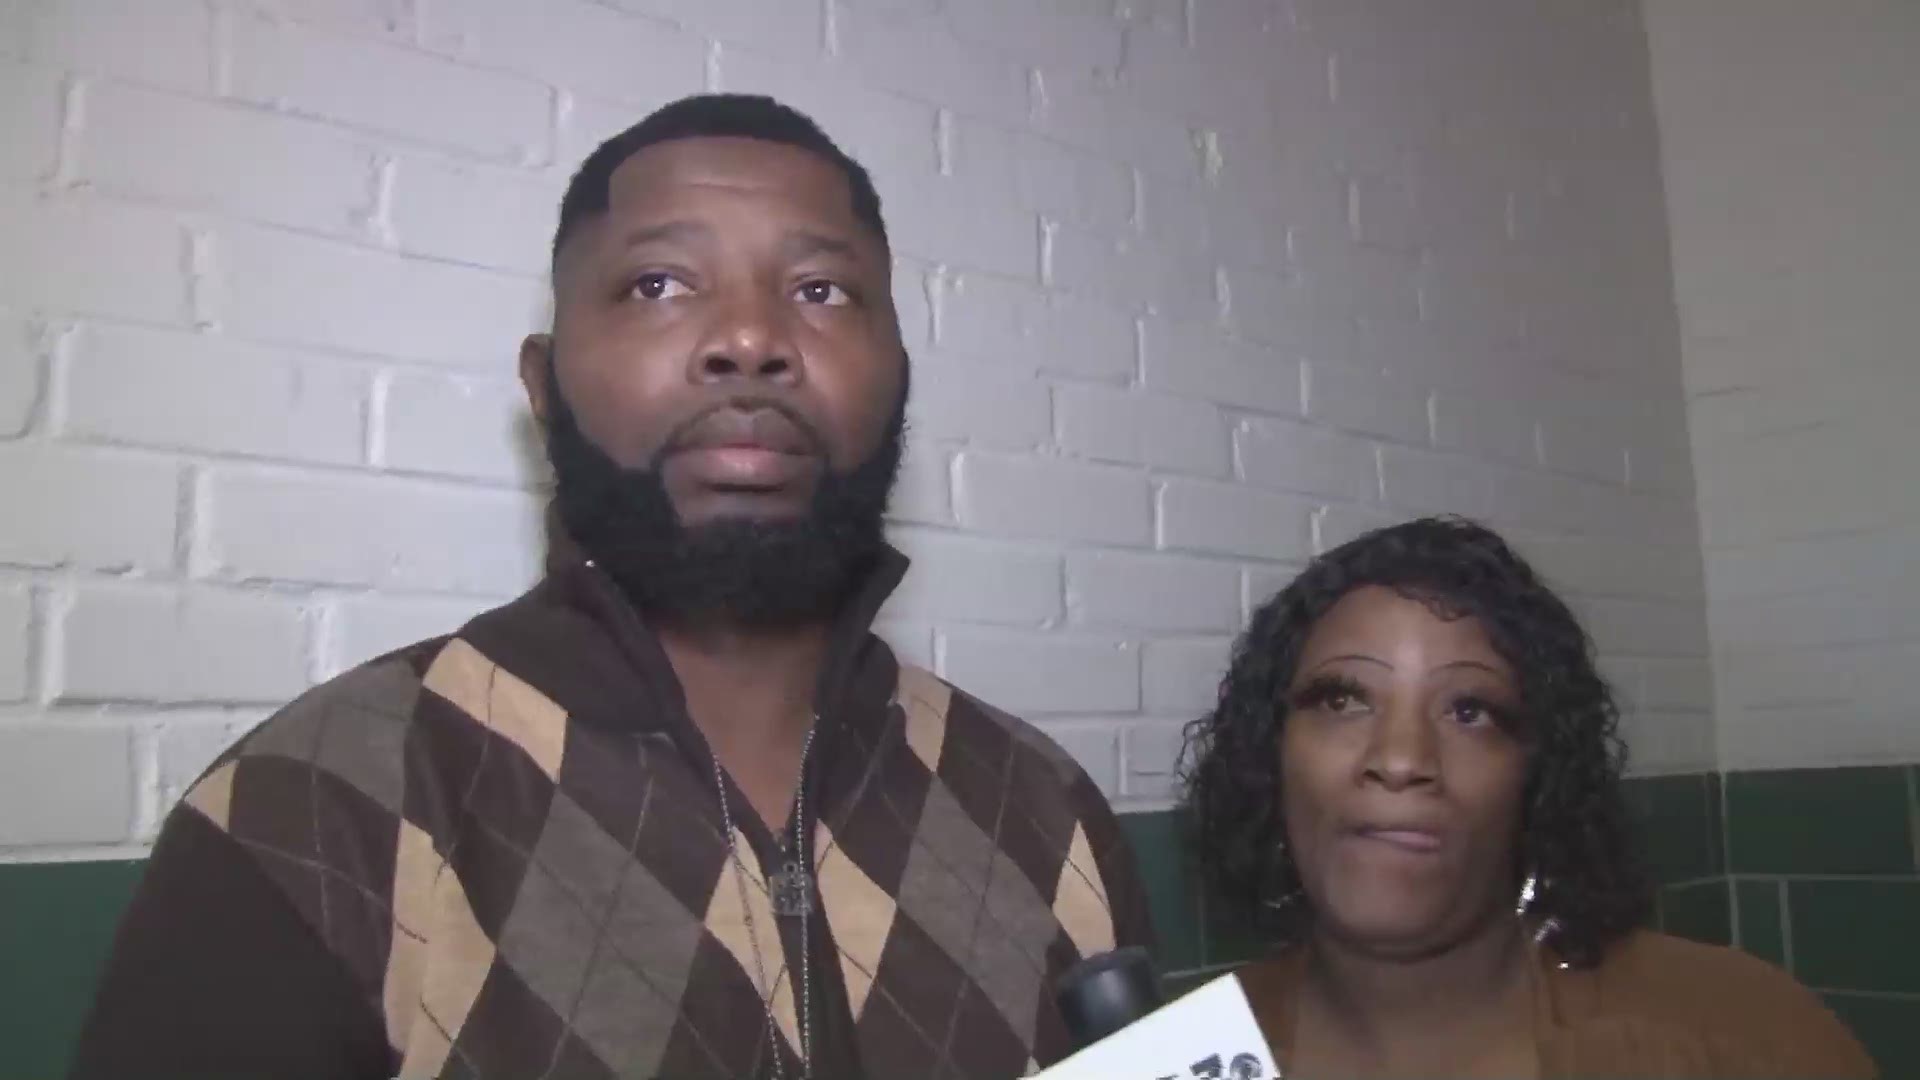 Demarcus Little's father, Andre, declared his son's innocence after a bond hearing on charges that he damaged Anitra Gunn's property days before her disappearance.